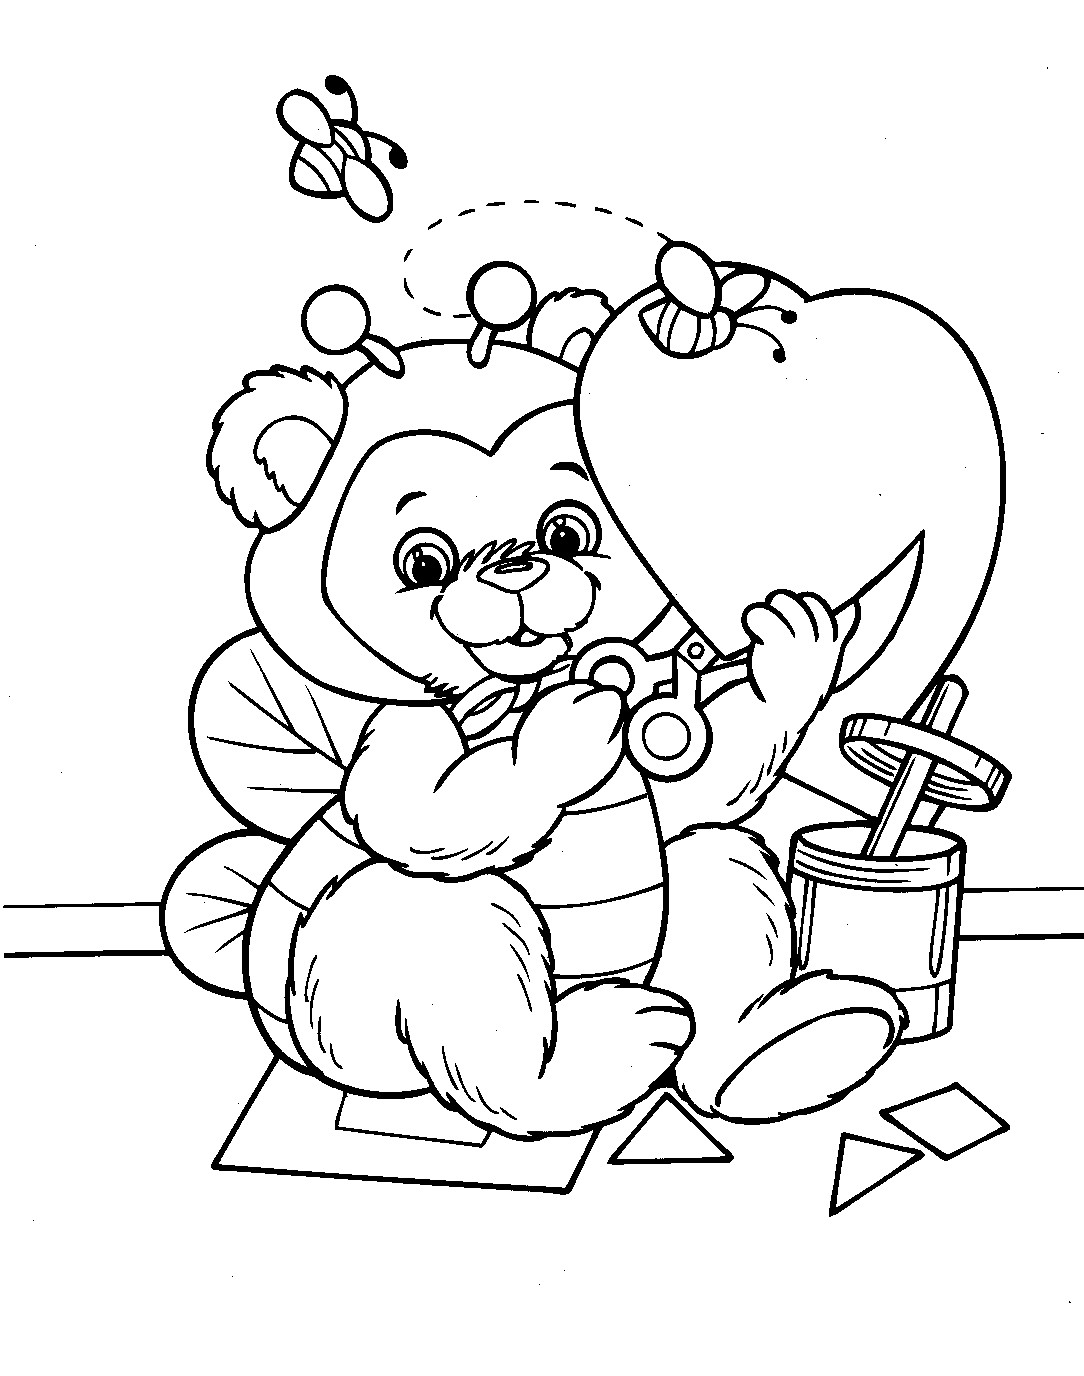 Valentine Coloring Sheets Free
 Free Printable Valentine Coloring Pages For Kids